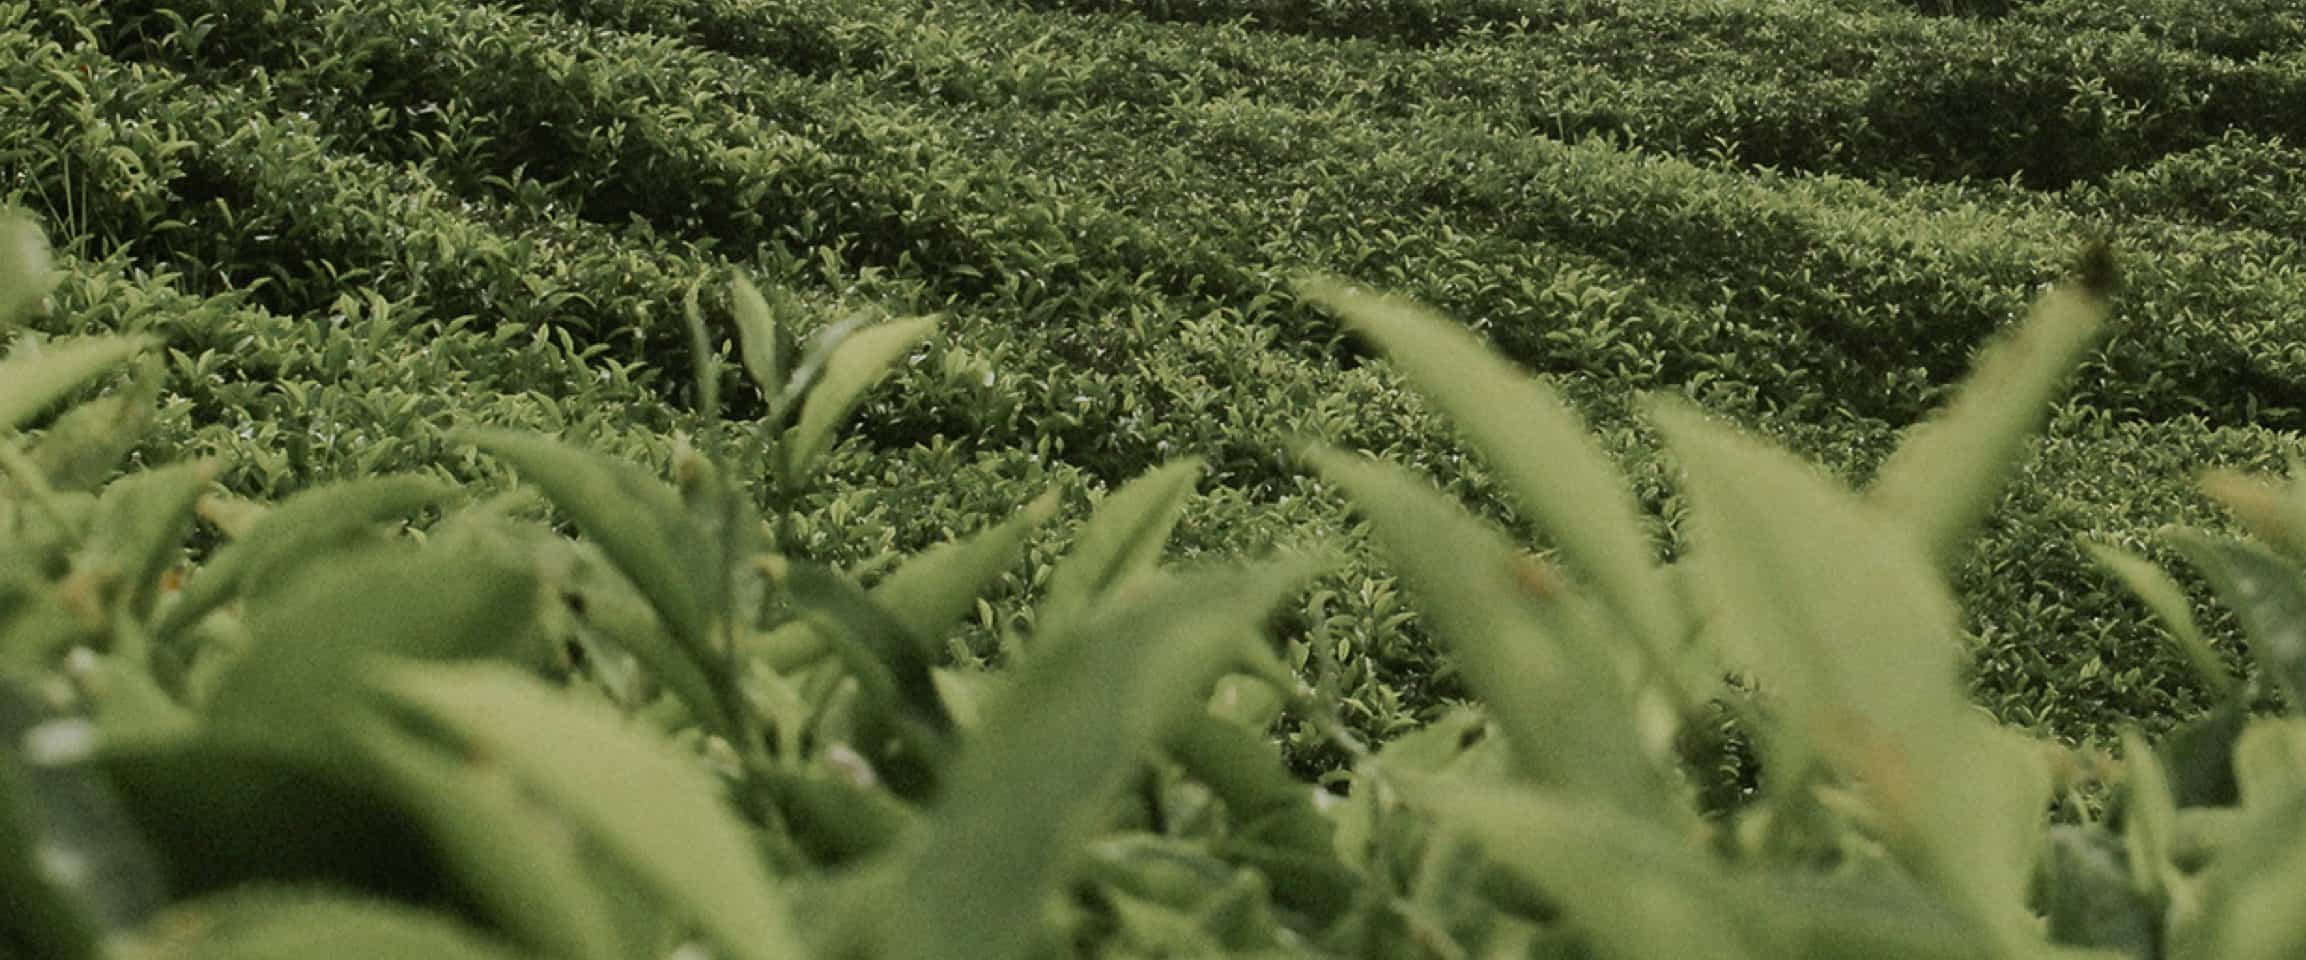 A field filled with fresh green tea leaves.